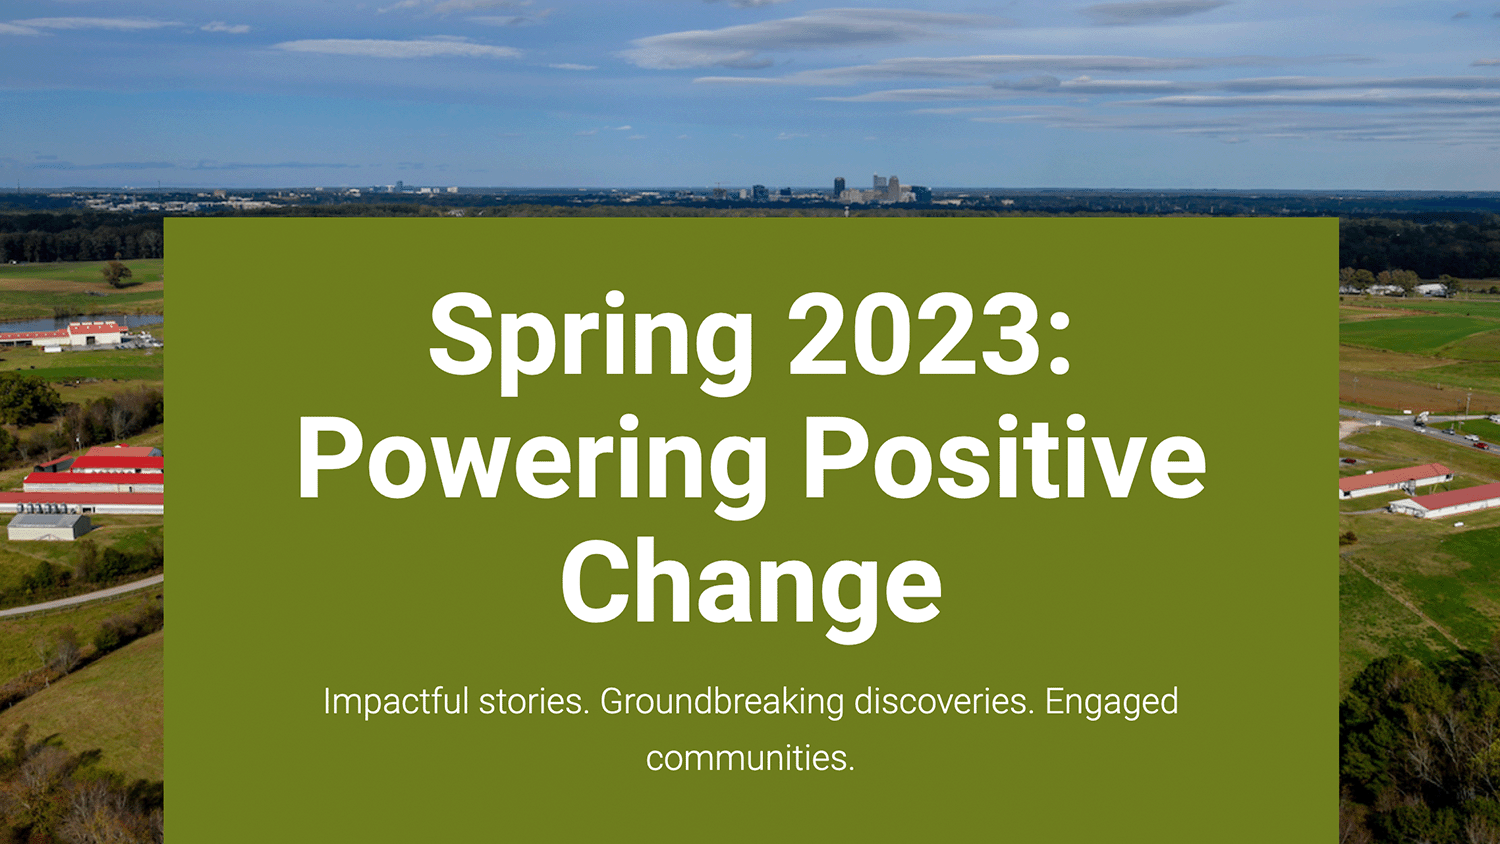 Farm image in the background and banner with Powering Positive Change